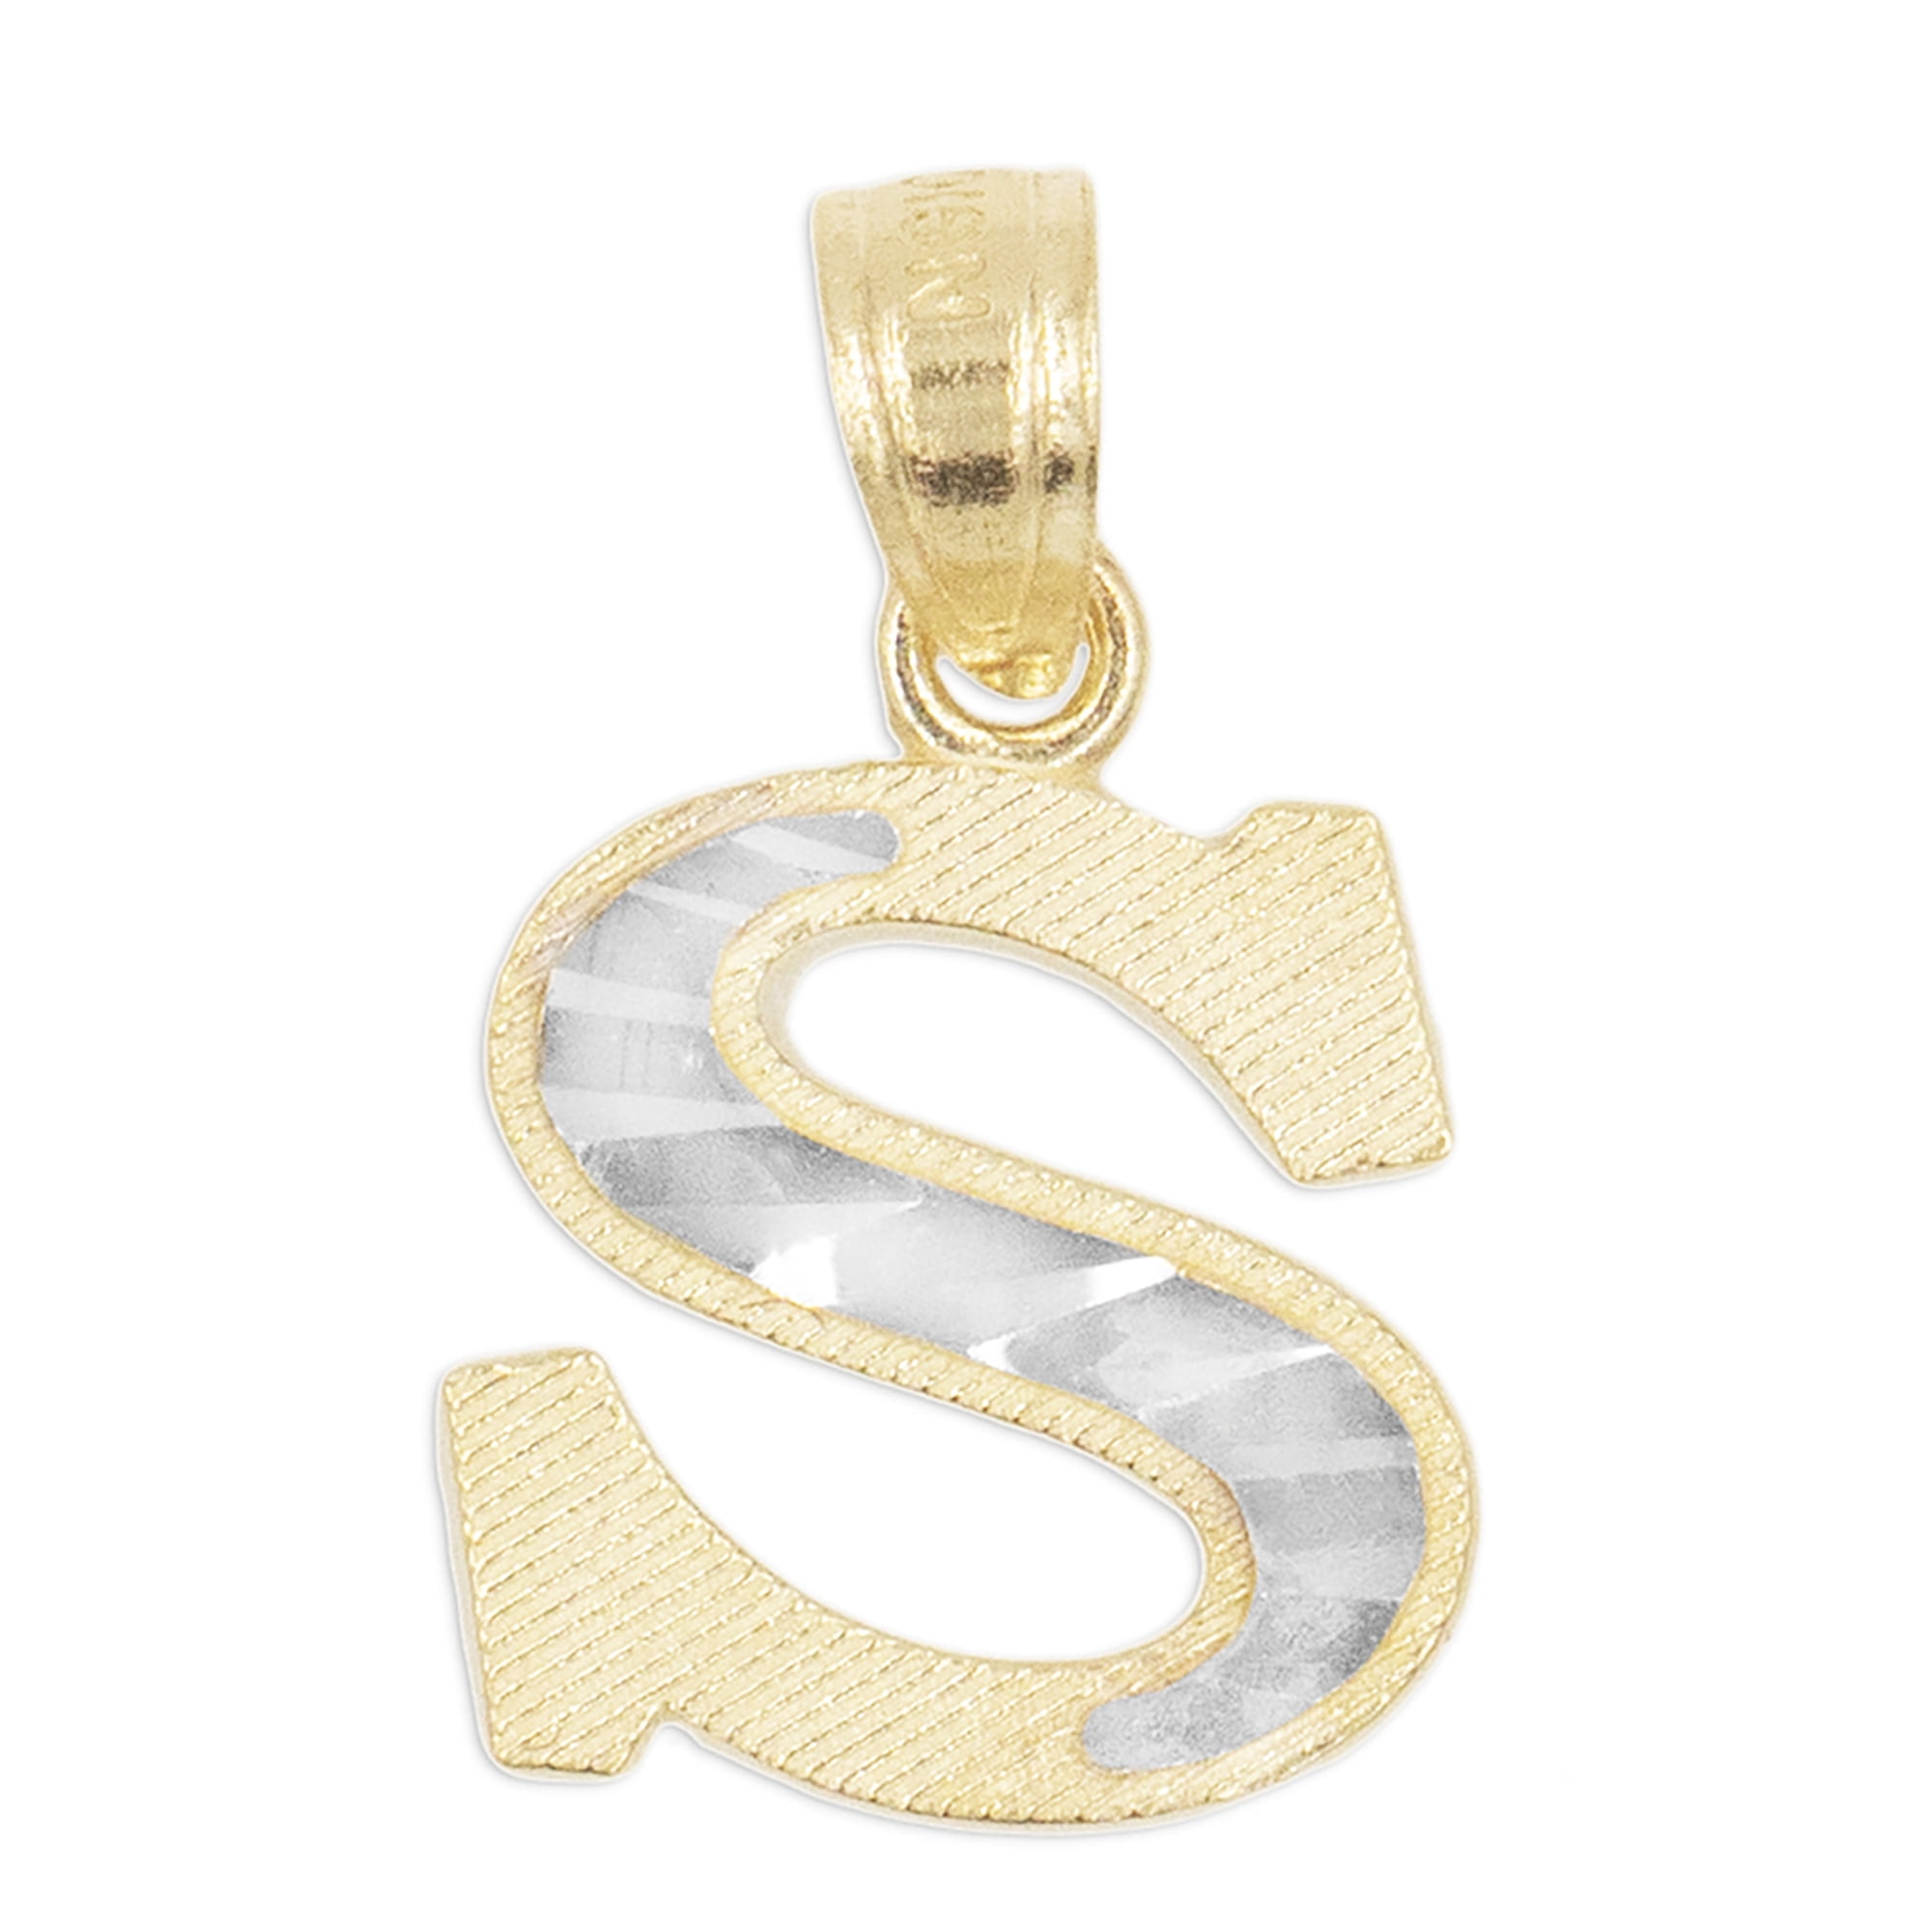 Available in Different Letters Personalized Letter Jewelry Gifts for Her 10k Real Solid Gold Two Tone Initial Pendant with Diamond Cut Finish 